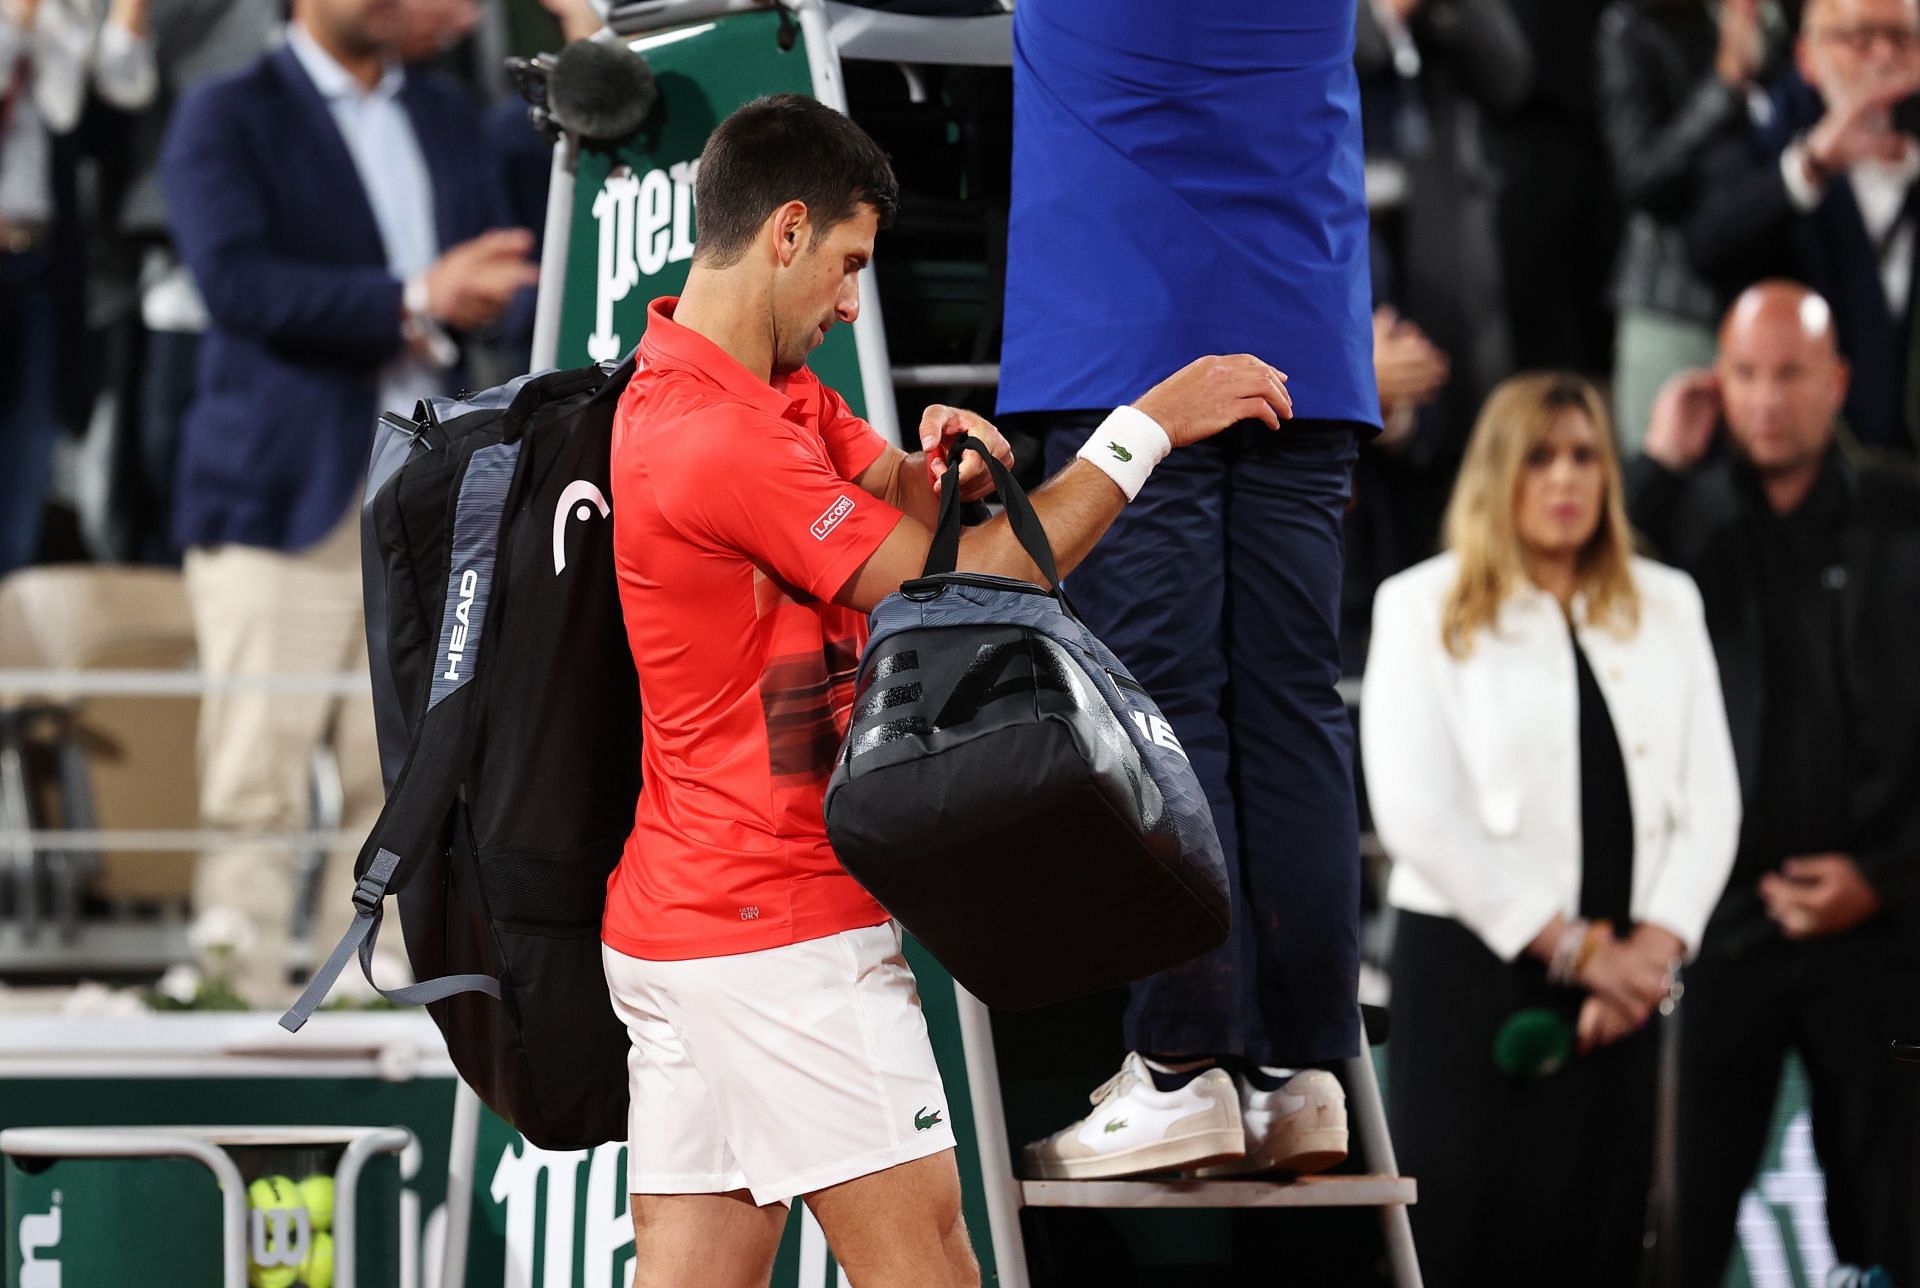 Novak Djokovic walks off the court after his loss to Rafael Nadal at the French Open